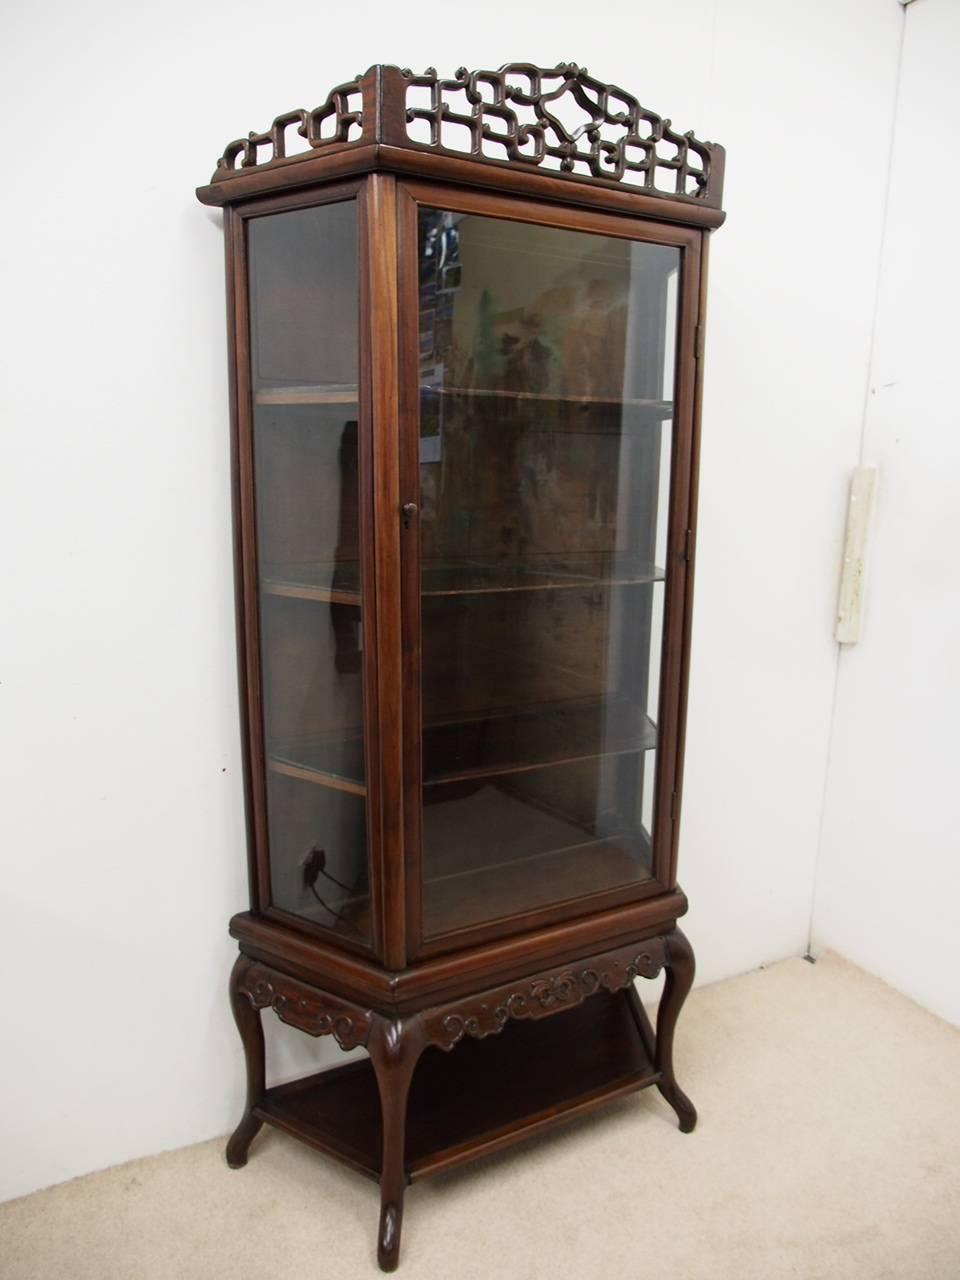 Hardwood display cabinet, circa 19th century. The top has a key pattern carved gallery above a central glazed door, flanked by glazed panel sides. With a shelved interior, it is all raised on a separate base with relief carved detailing and sits on